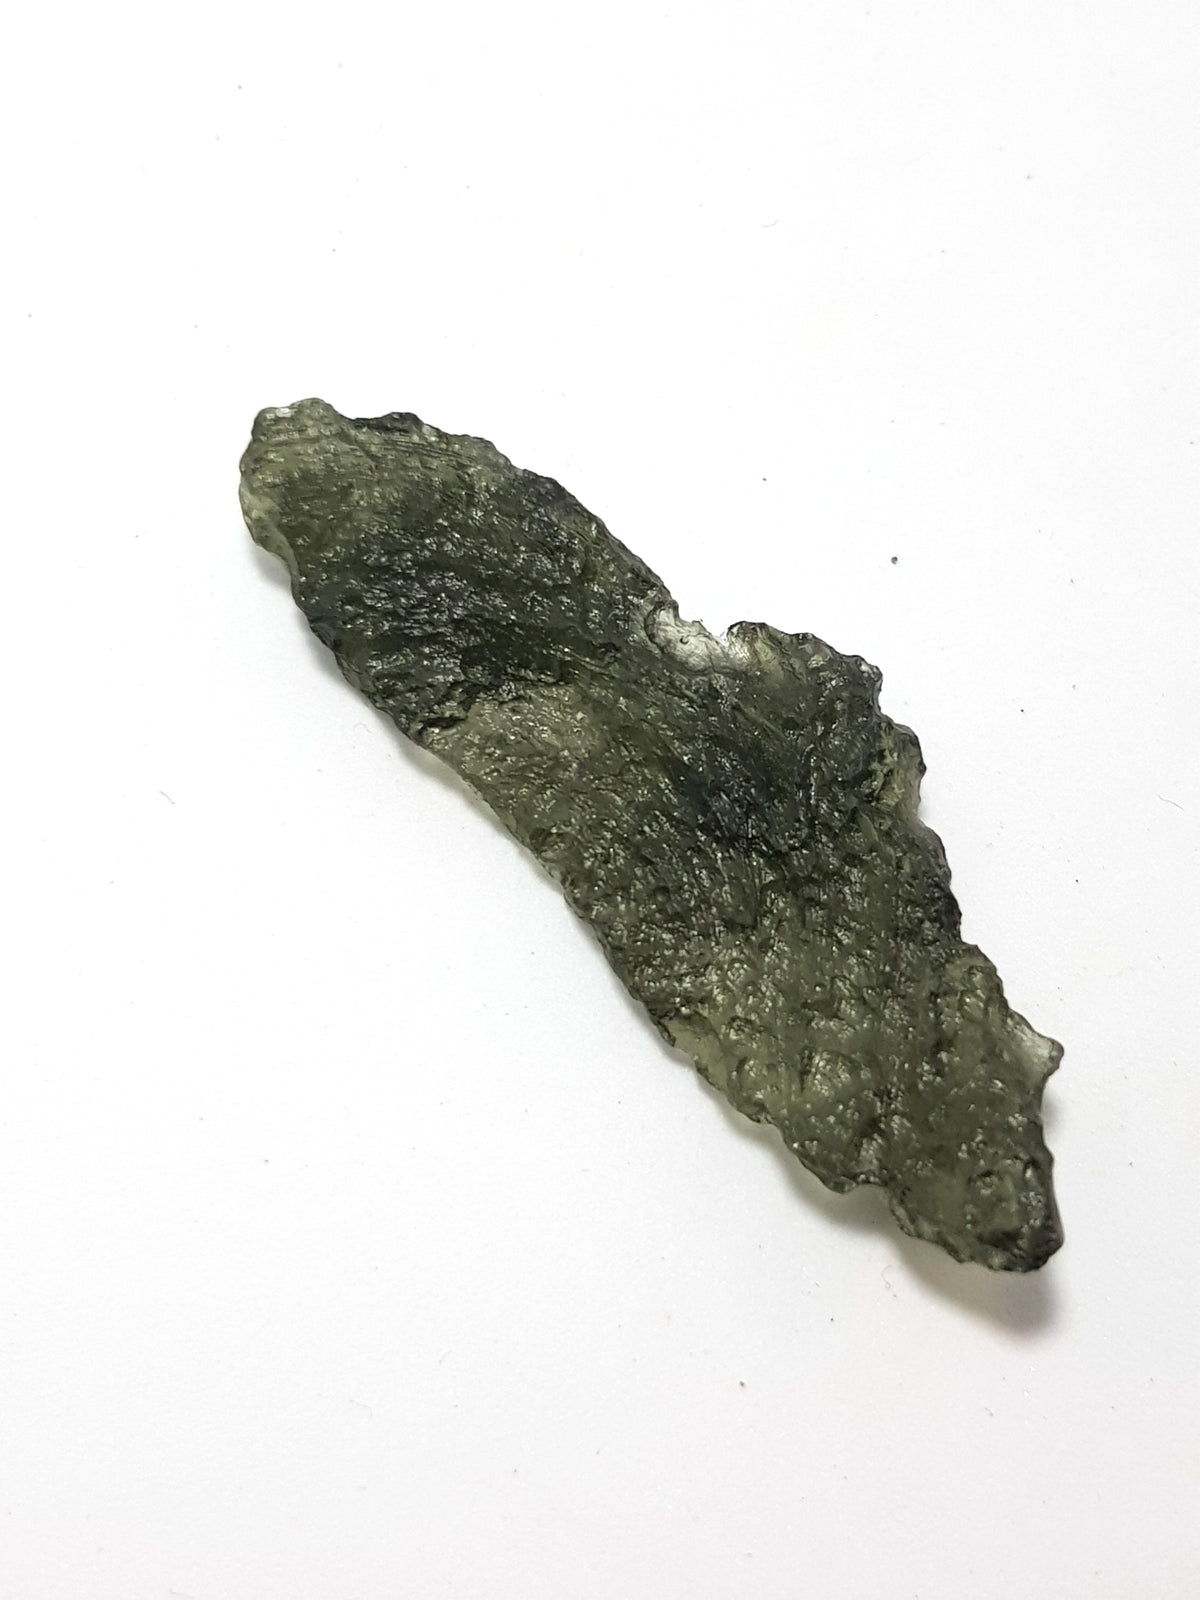 A sample of moldavite. It is green, slightly translucent and shows the famous wrinkled rind.